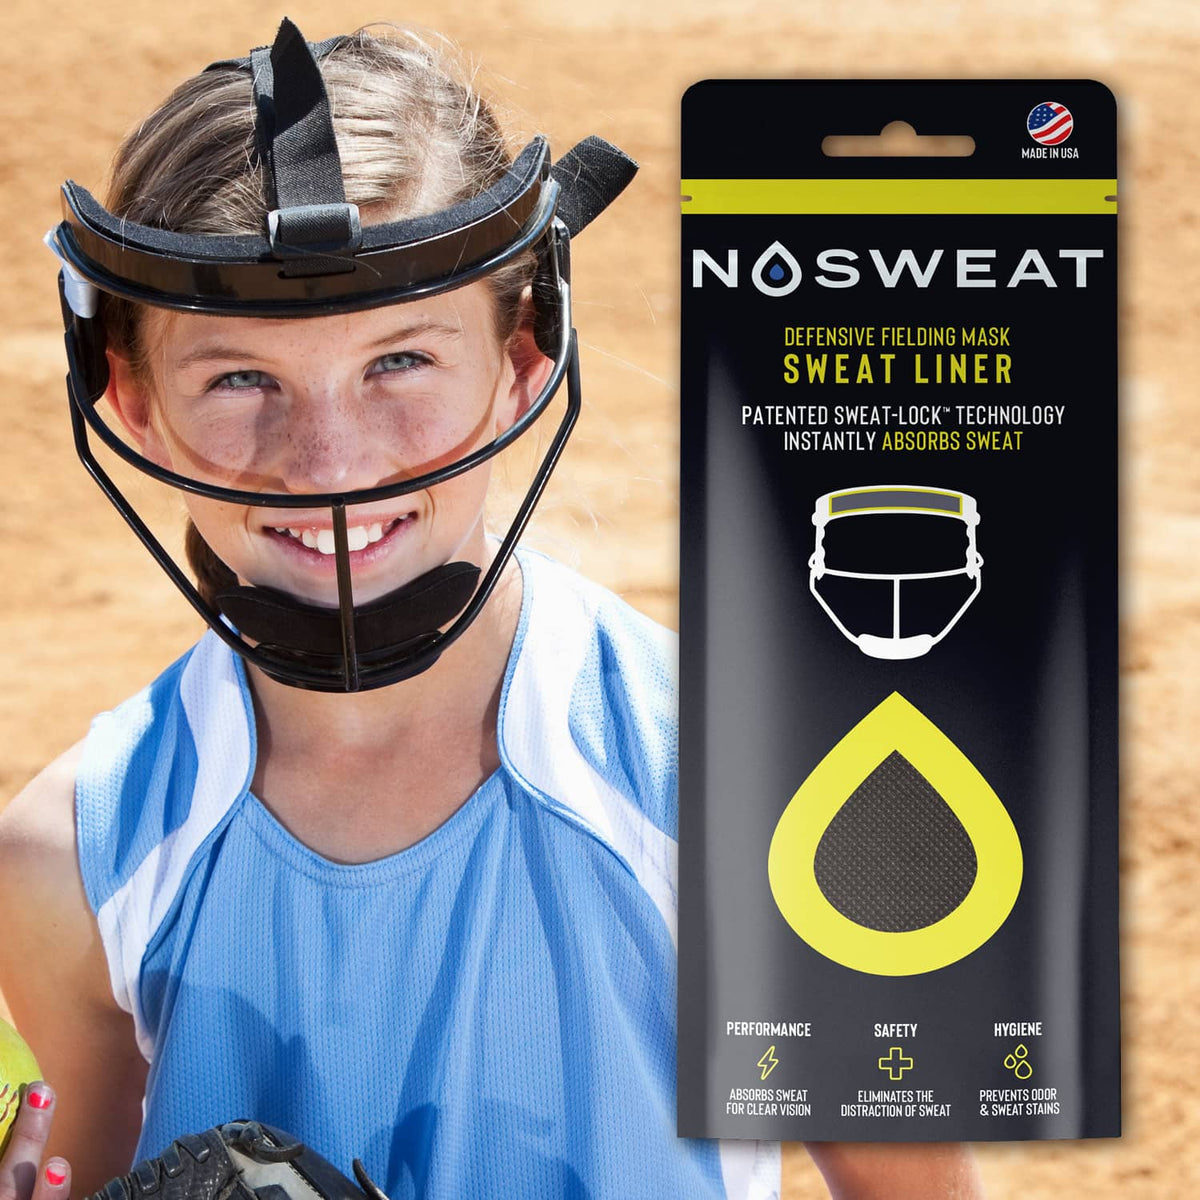 NoSweat Hat and Helmet Liner - 3 Pack